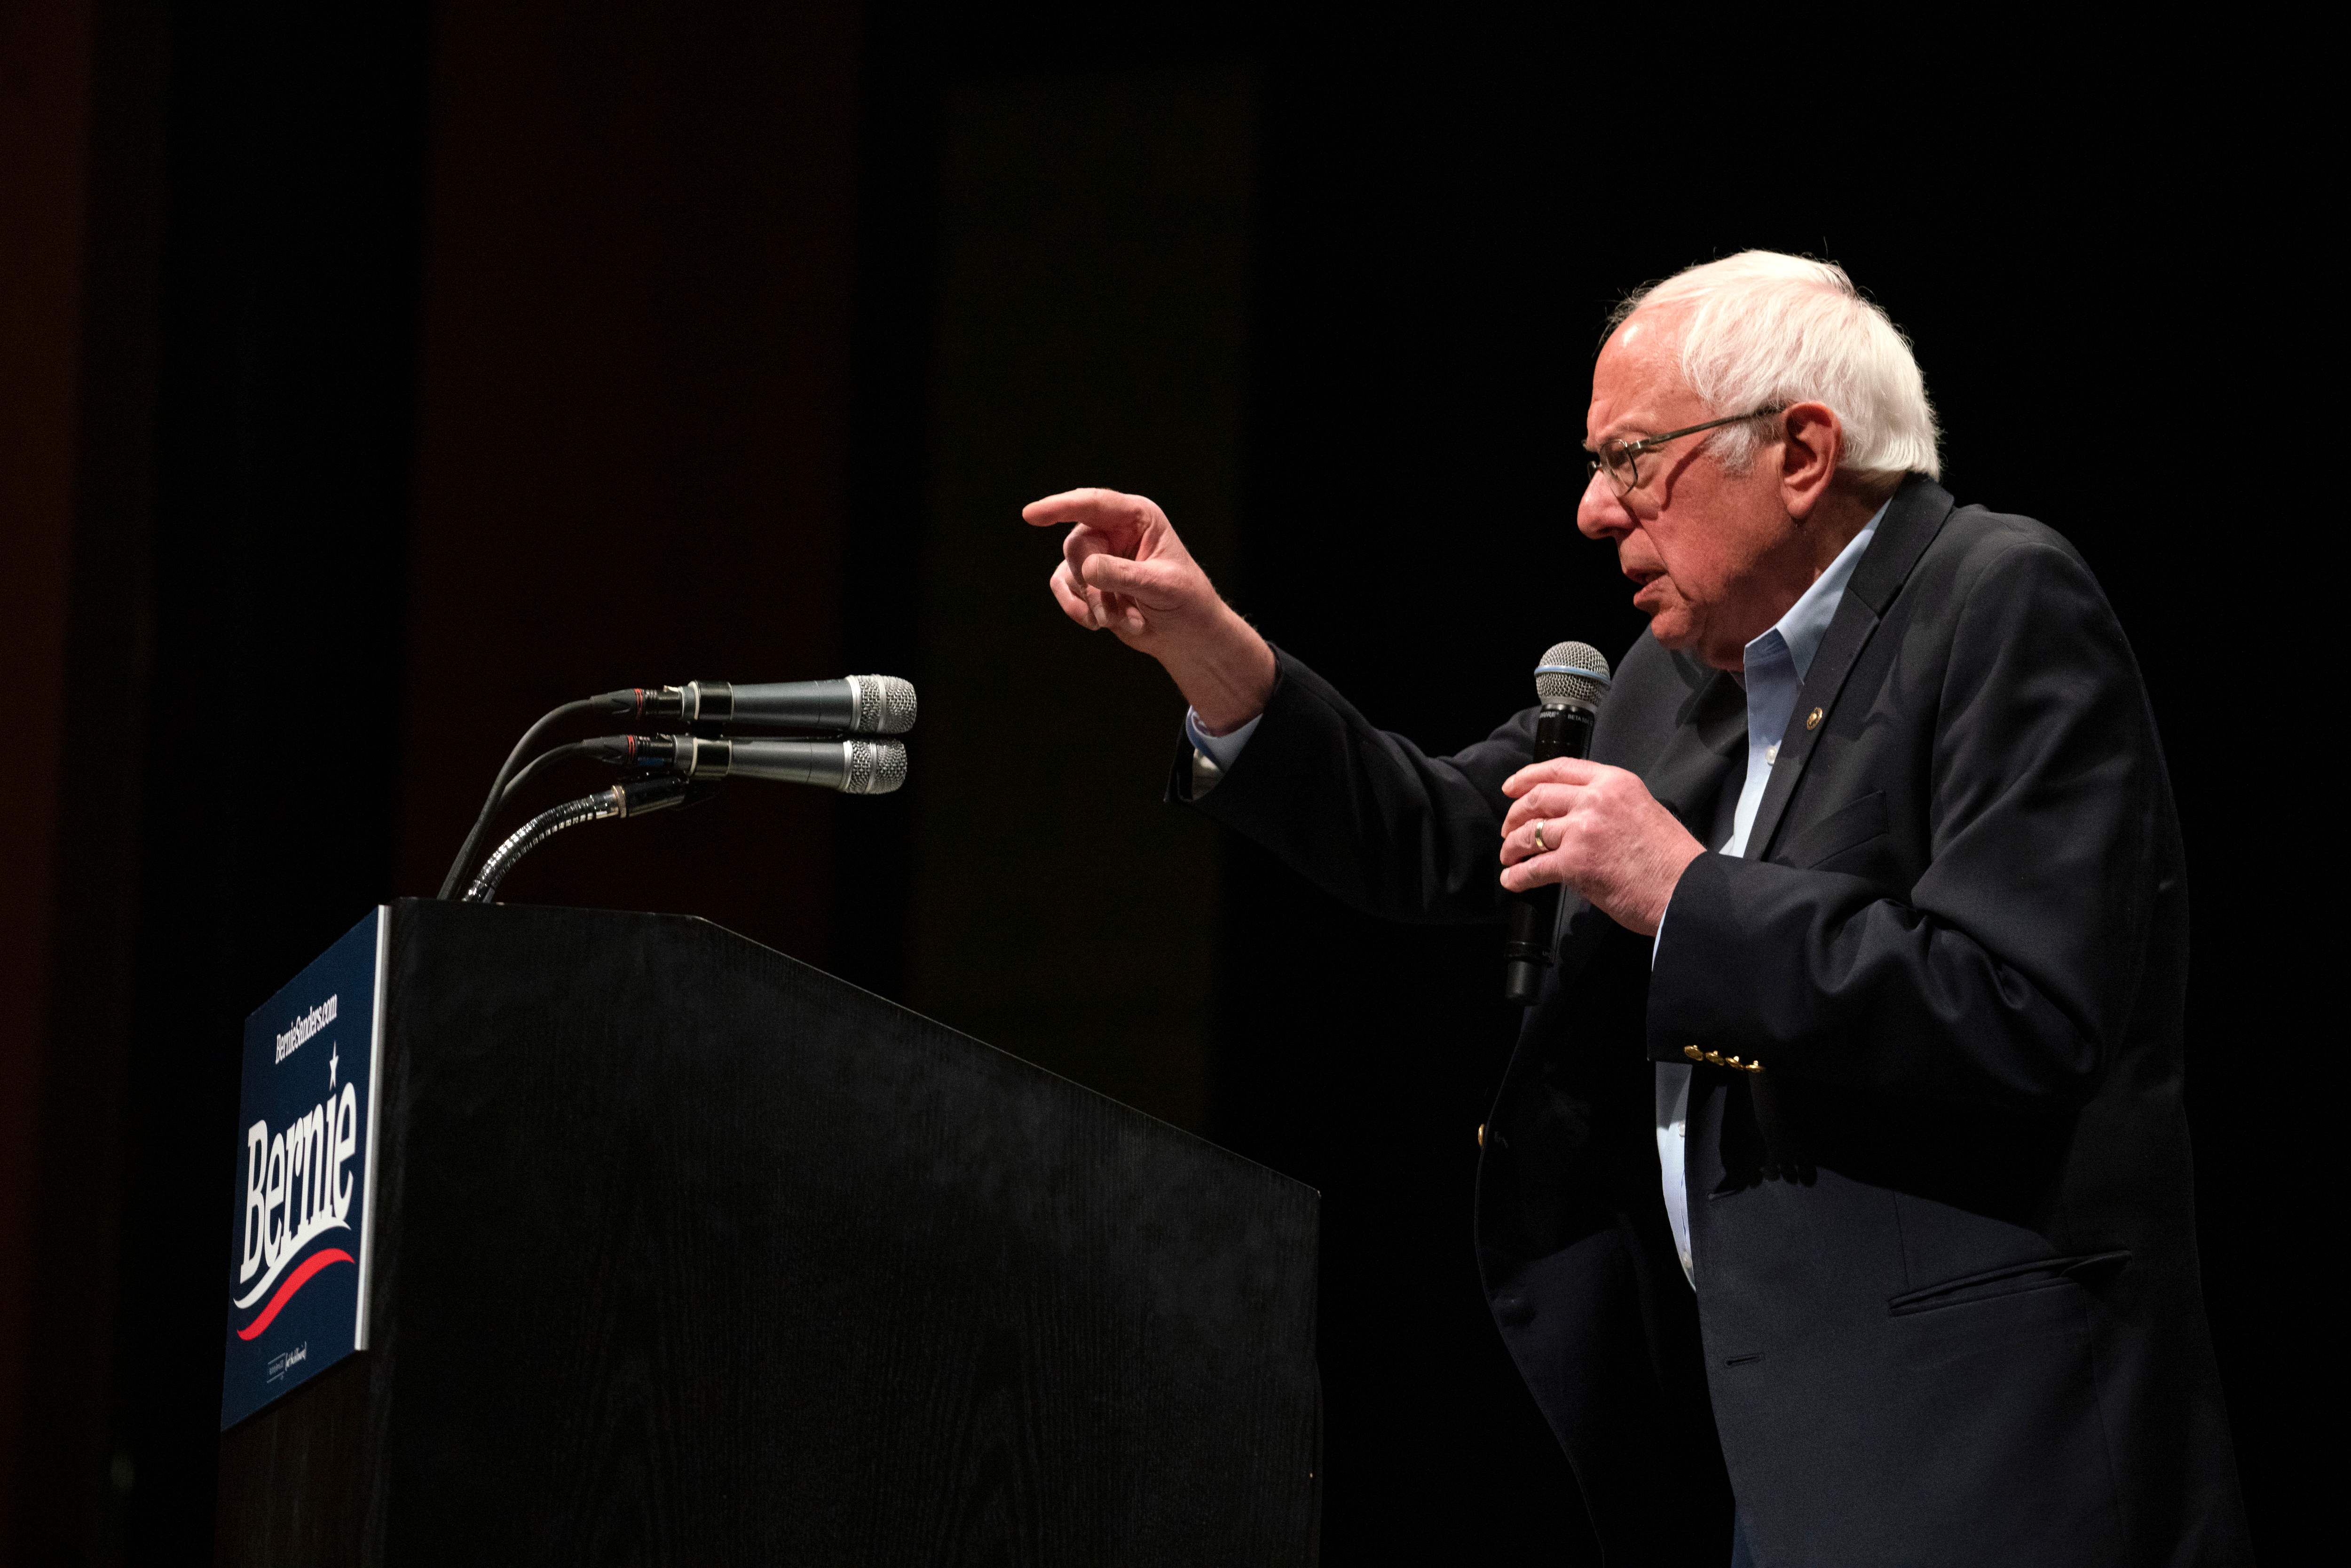 Democratic presidential hopeful Vermont Senator Bernie Sanders gesures as he speaks during a rally at the Abraham Chavez Theater on February 22, 2020 in El Paso, Texas. - Leftist Bernie Sanders took an early lead on February 22 in Nevada's caucuses, the third nominating contest for Democrats in their high-stakes process to see who will challenge Republican Donald Trump in November's presidential election. (Photo by Paul Ratje / AFP)